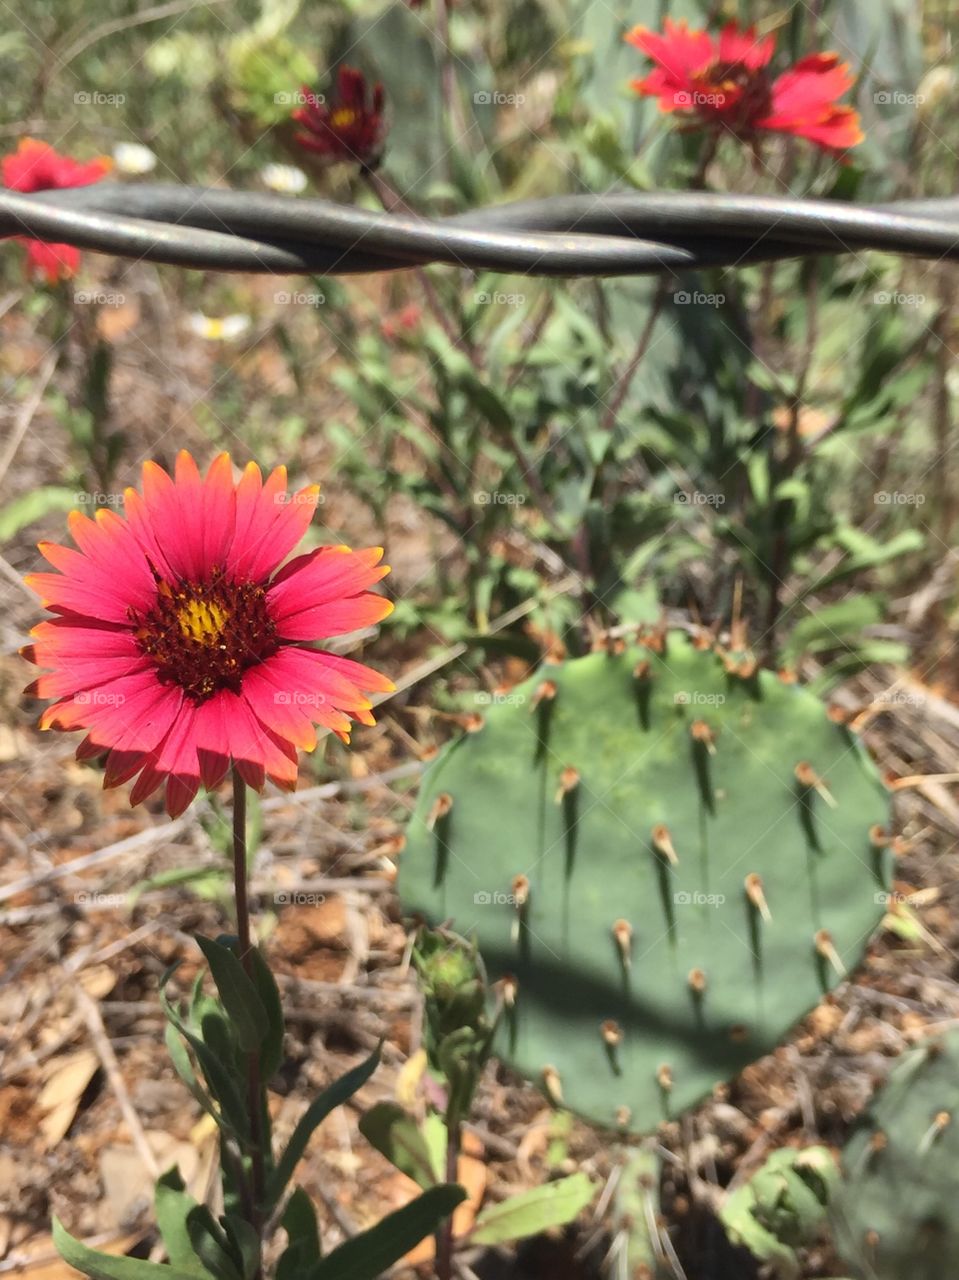 Wildflower growing next to a Cactus and a Fence